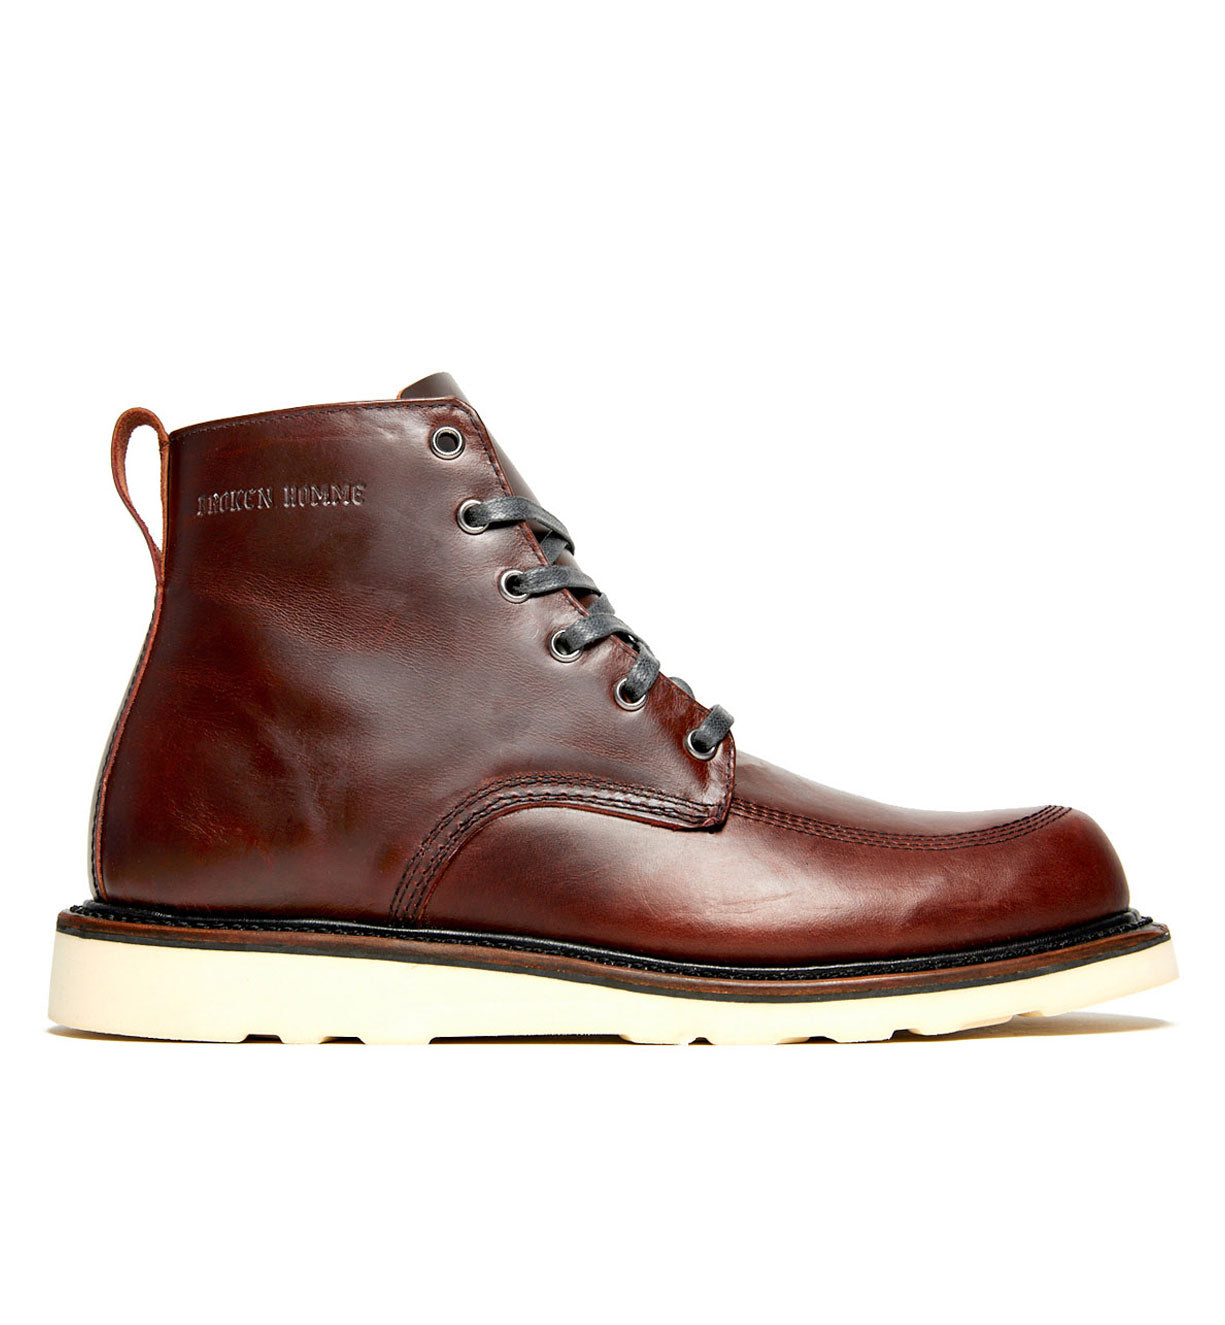 A Jaime Boot by Broken Homme, a leather work boot with a natural wedge sole.